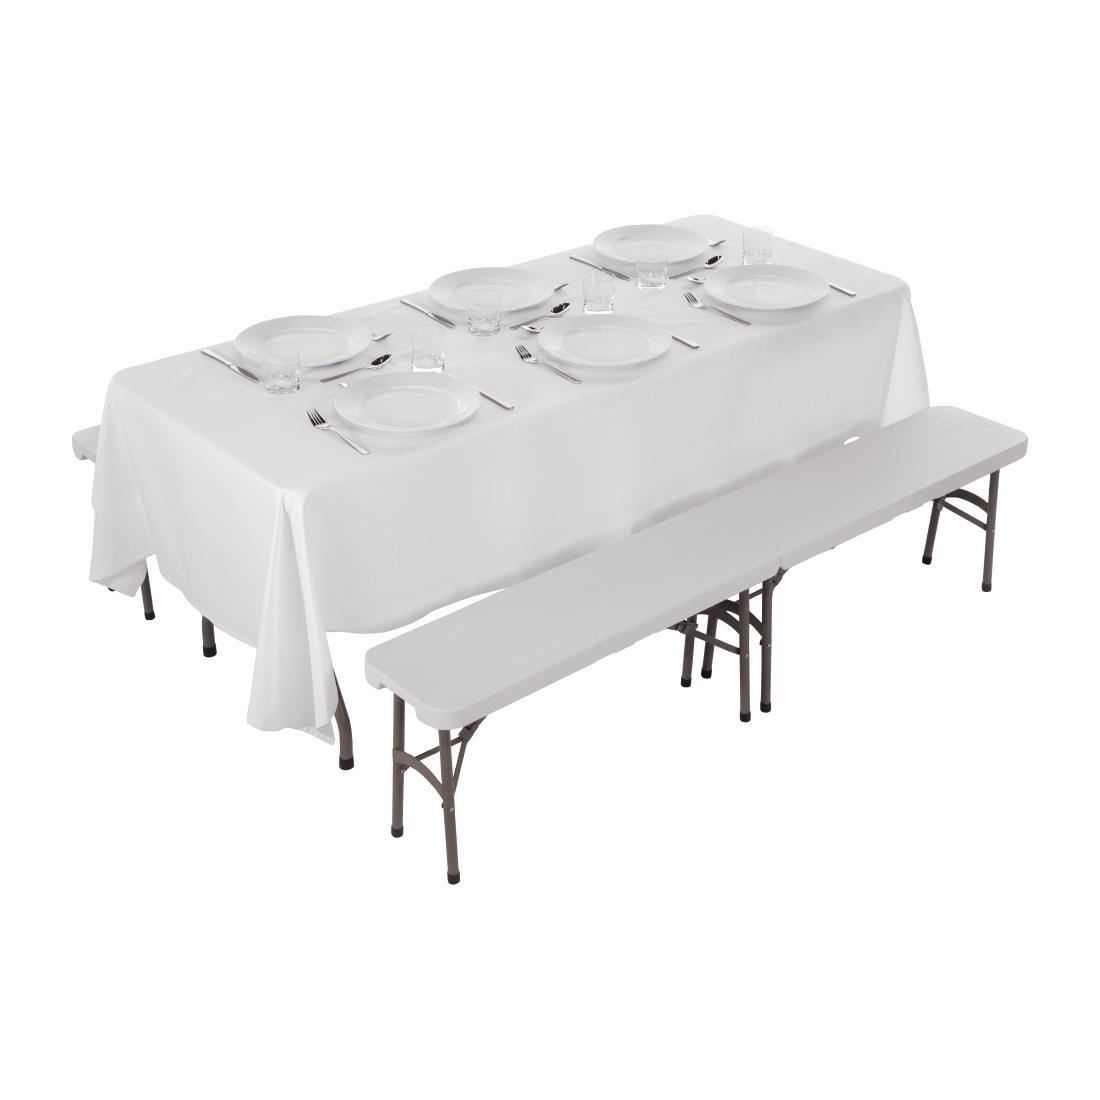 Special Offer Bolero PE Centre Folding Table 6ft with Two Folding Benches - SA425  - 2